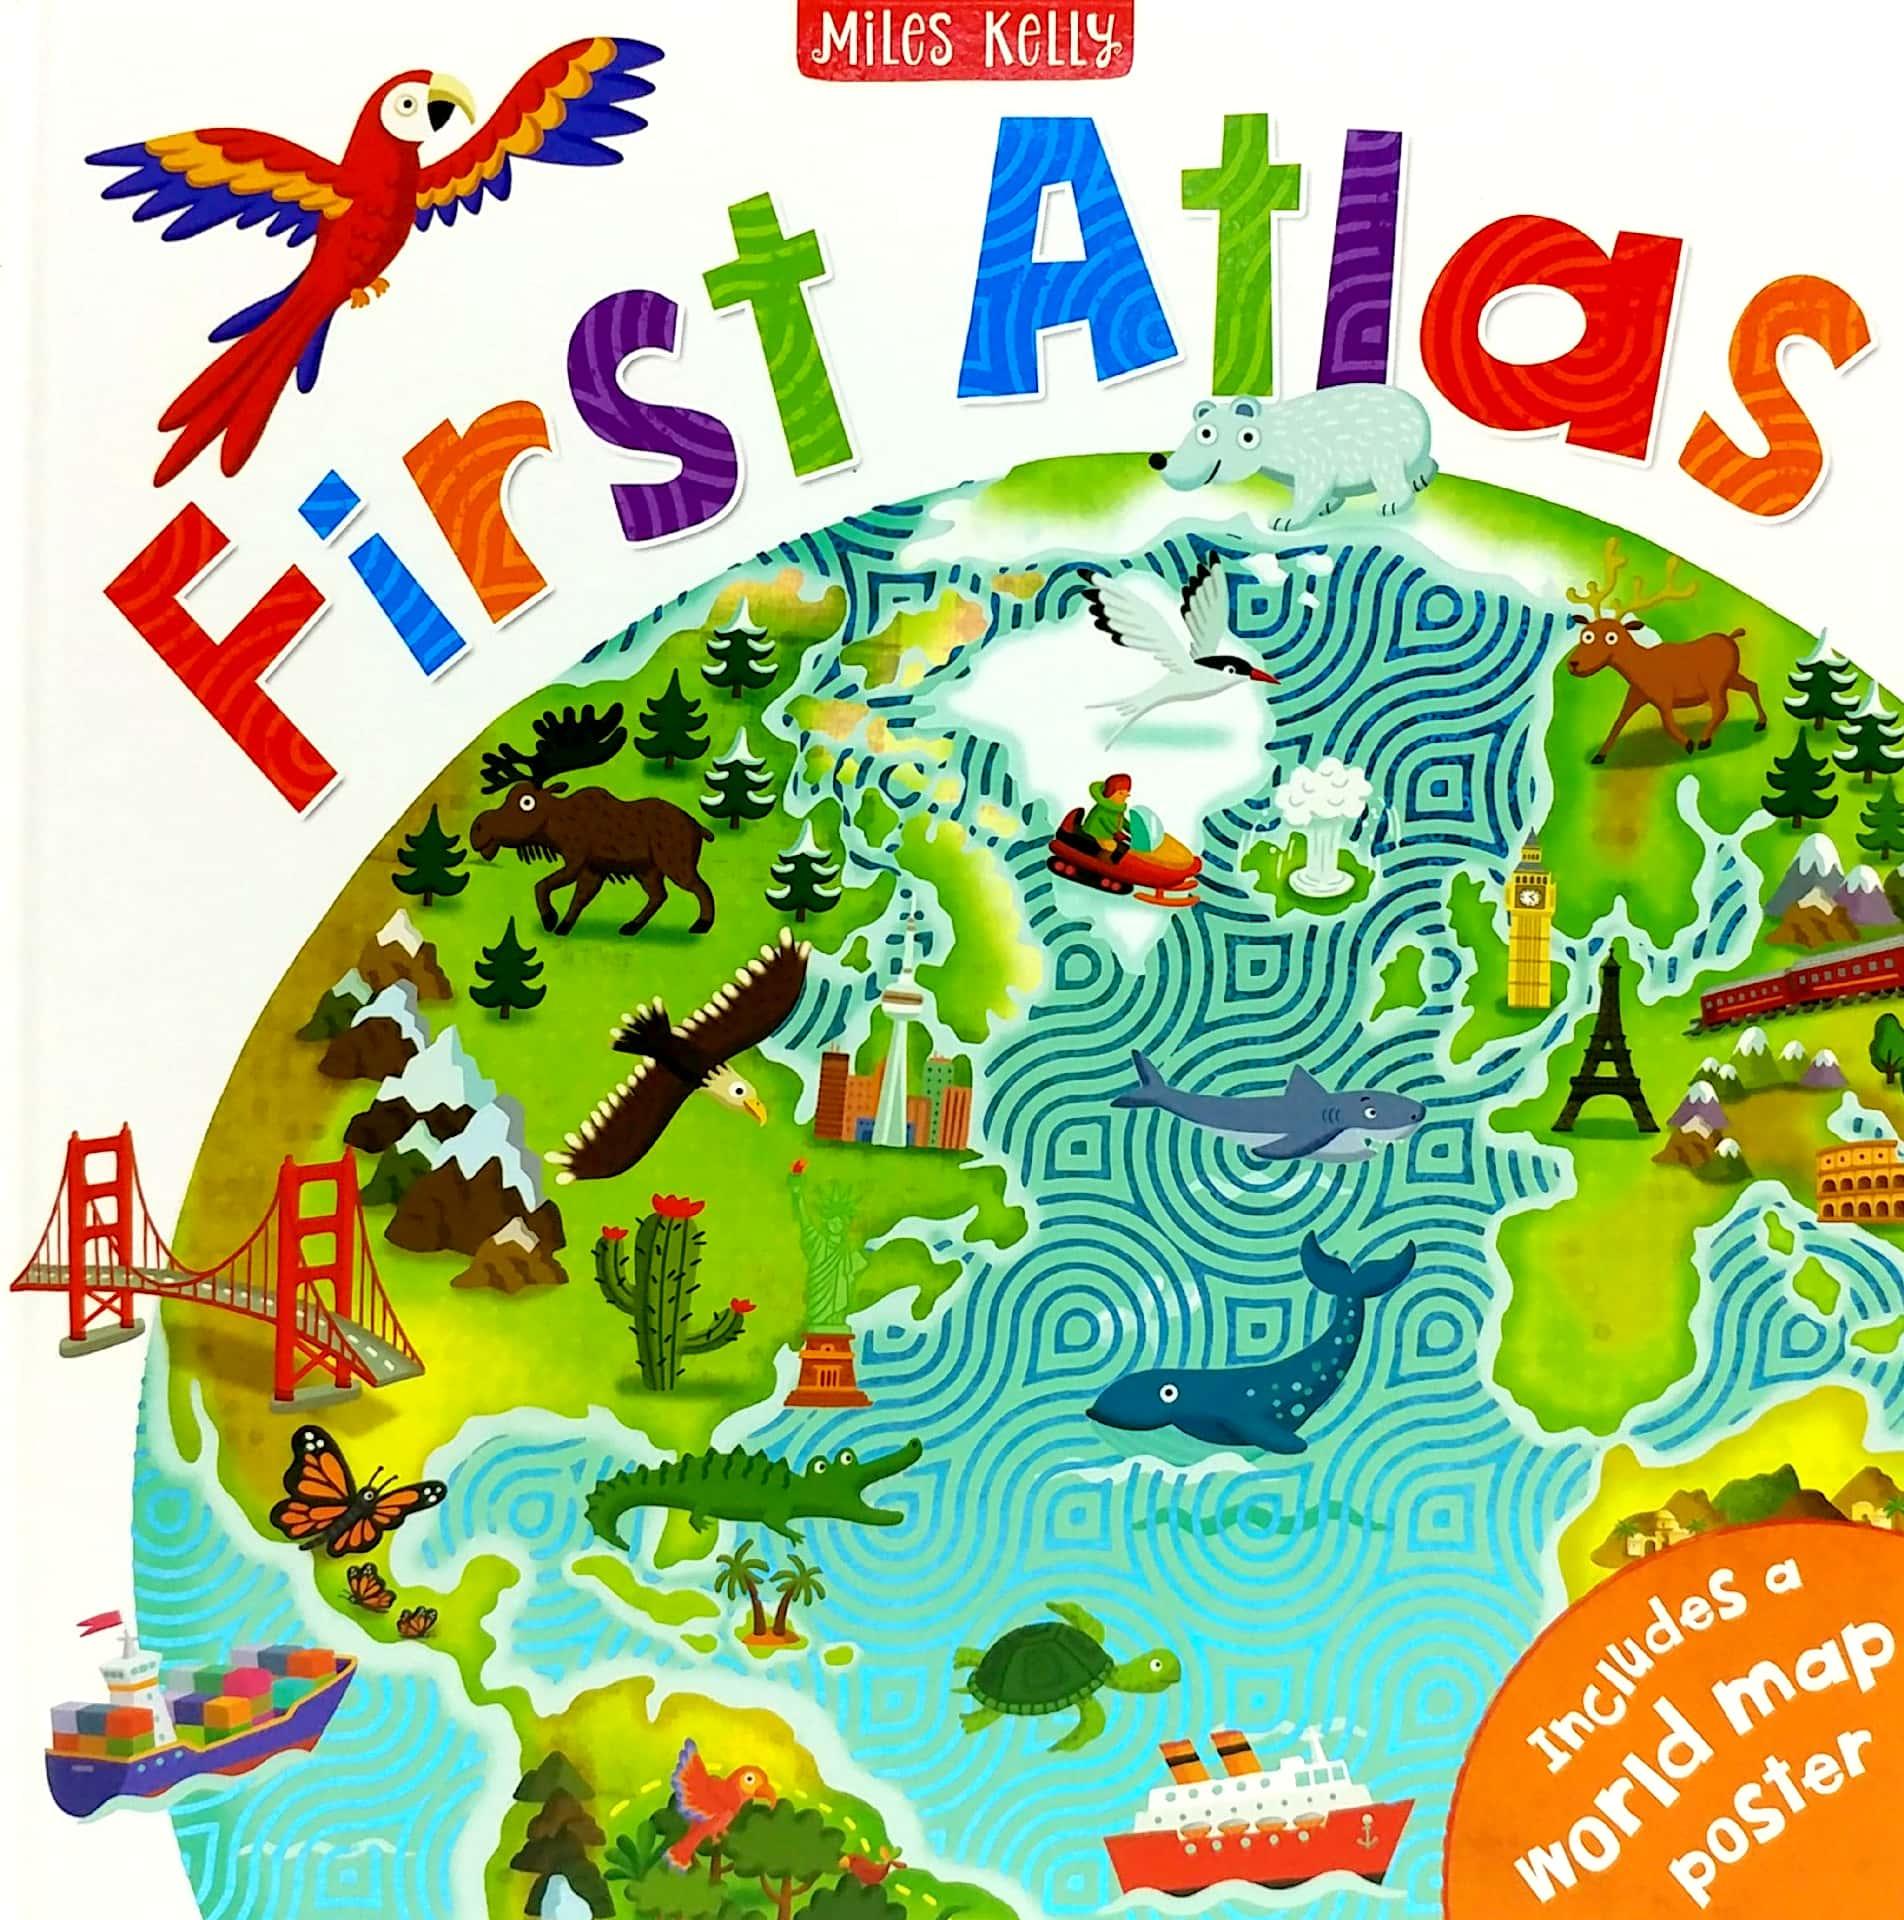 First Facts Slipcase